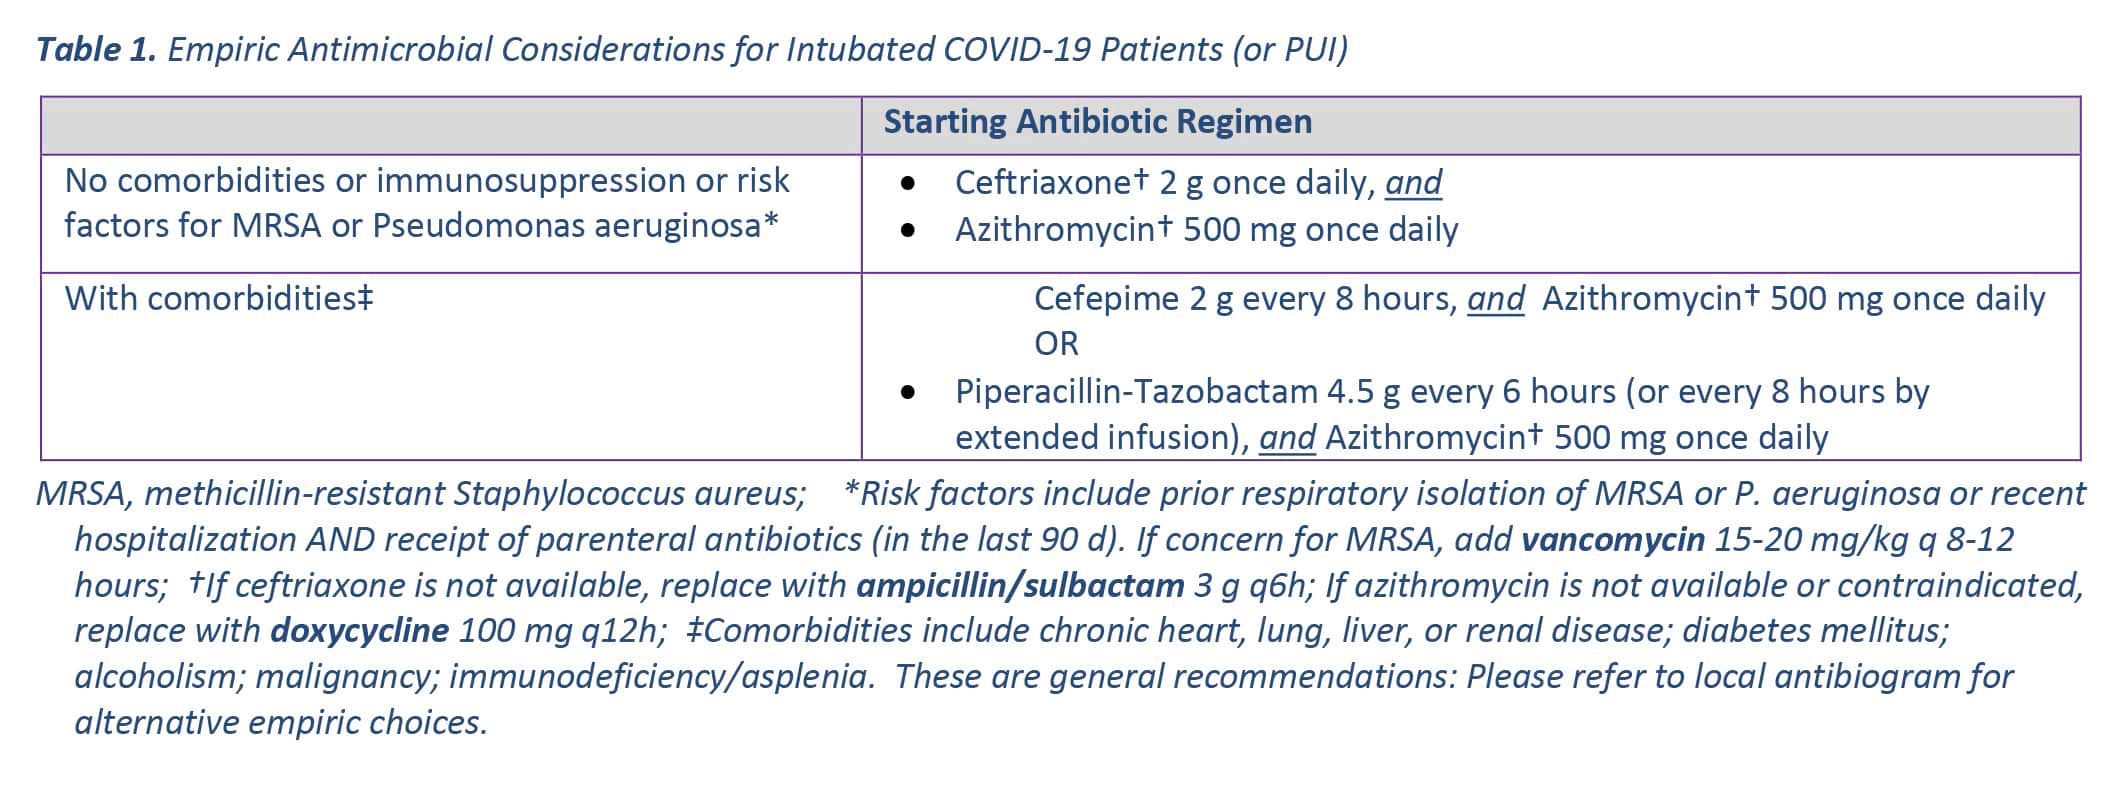 Empiric Antimicrobial Considerations for Intubated COVID-19 Patients (or PUI)